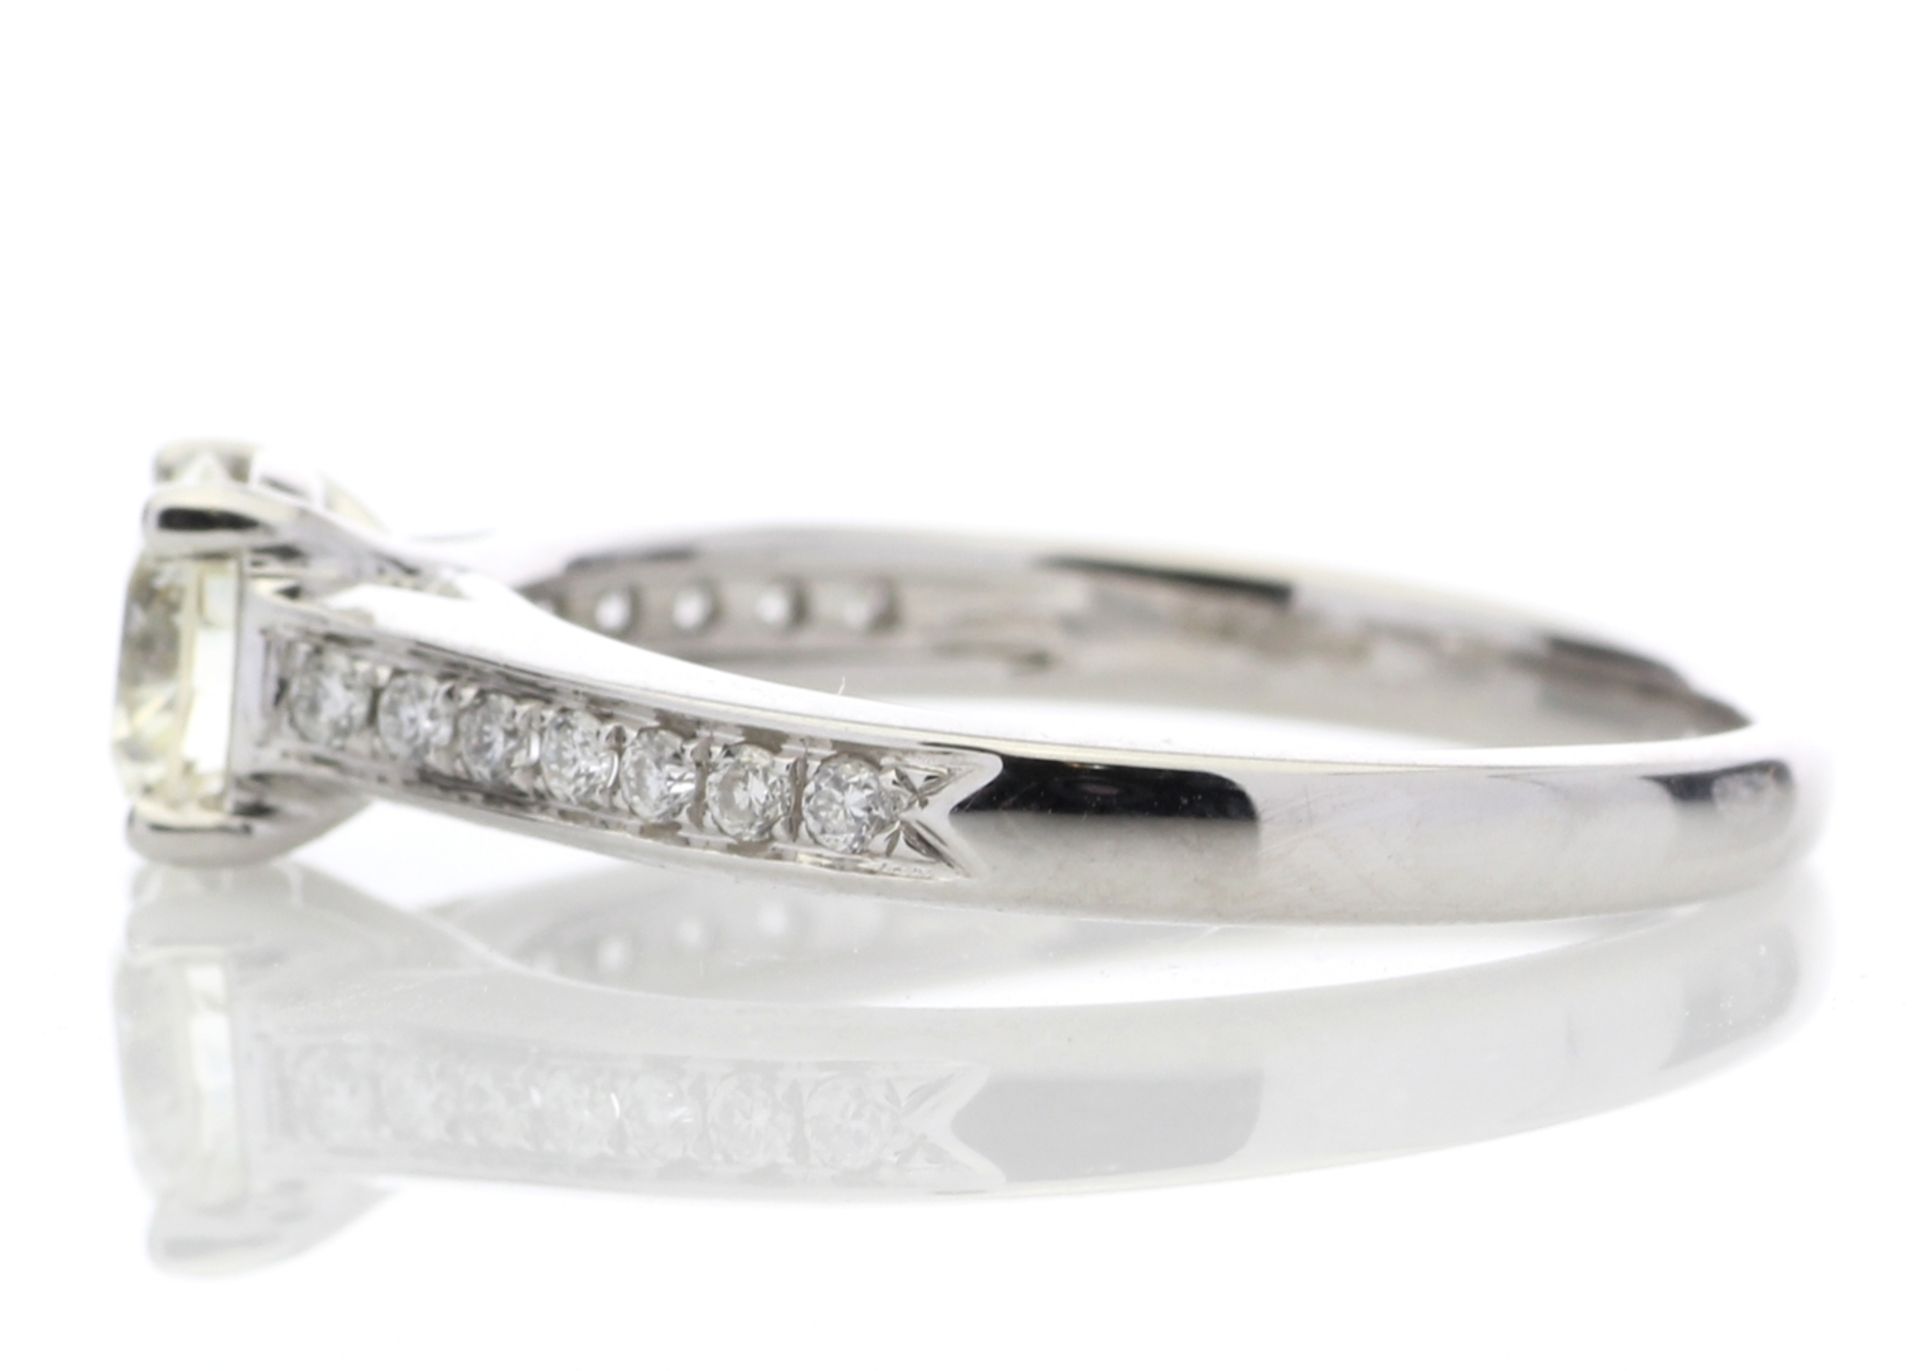 18ct White Gold Single Stone Claw Set Diamond Ring (0.60) 0.73 Carats - Valued by AGI £4,809.00 - - Image 3 of 4